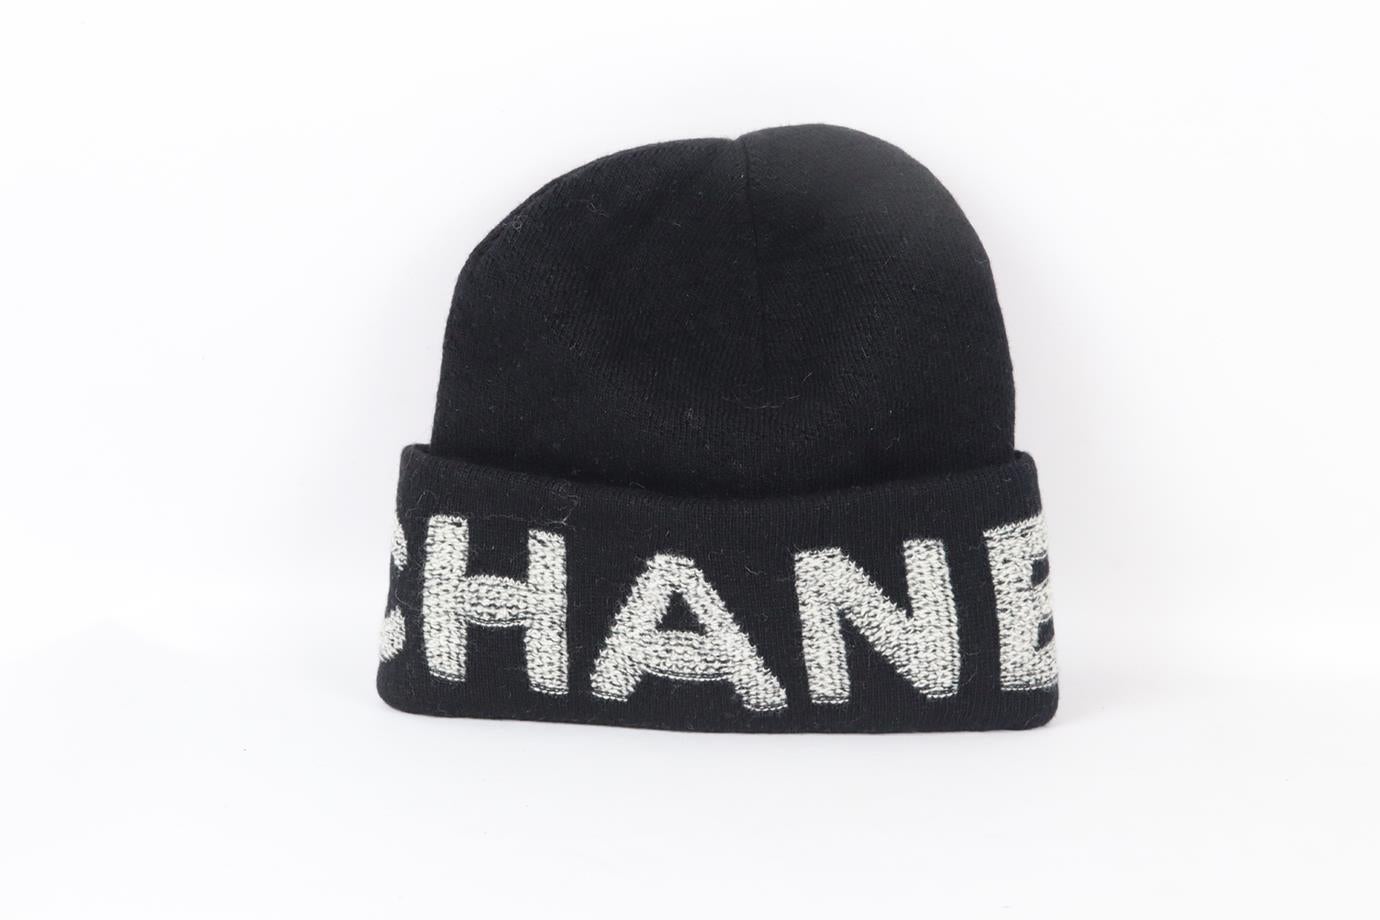 Chanel 2021 logo intarsia wool and cashmere blend beanie. Black and white. 70% Wool, 30% cashmere. Does not come with dustbag or box. Size: One Size. Height: 9 in. Circumference: 22 in. Very good condition - Worn once. No sign of wear; see pictures.